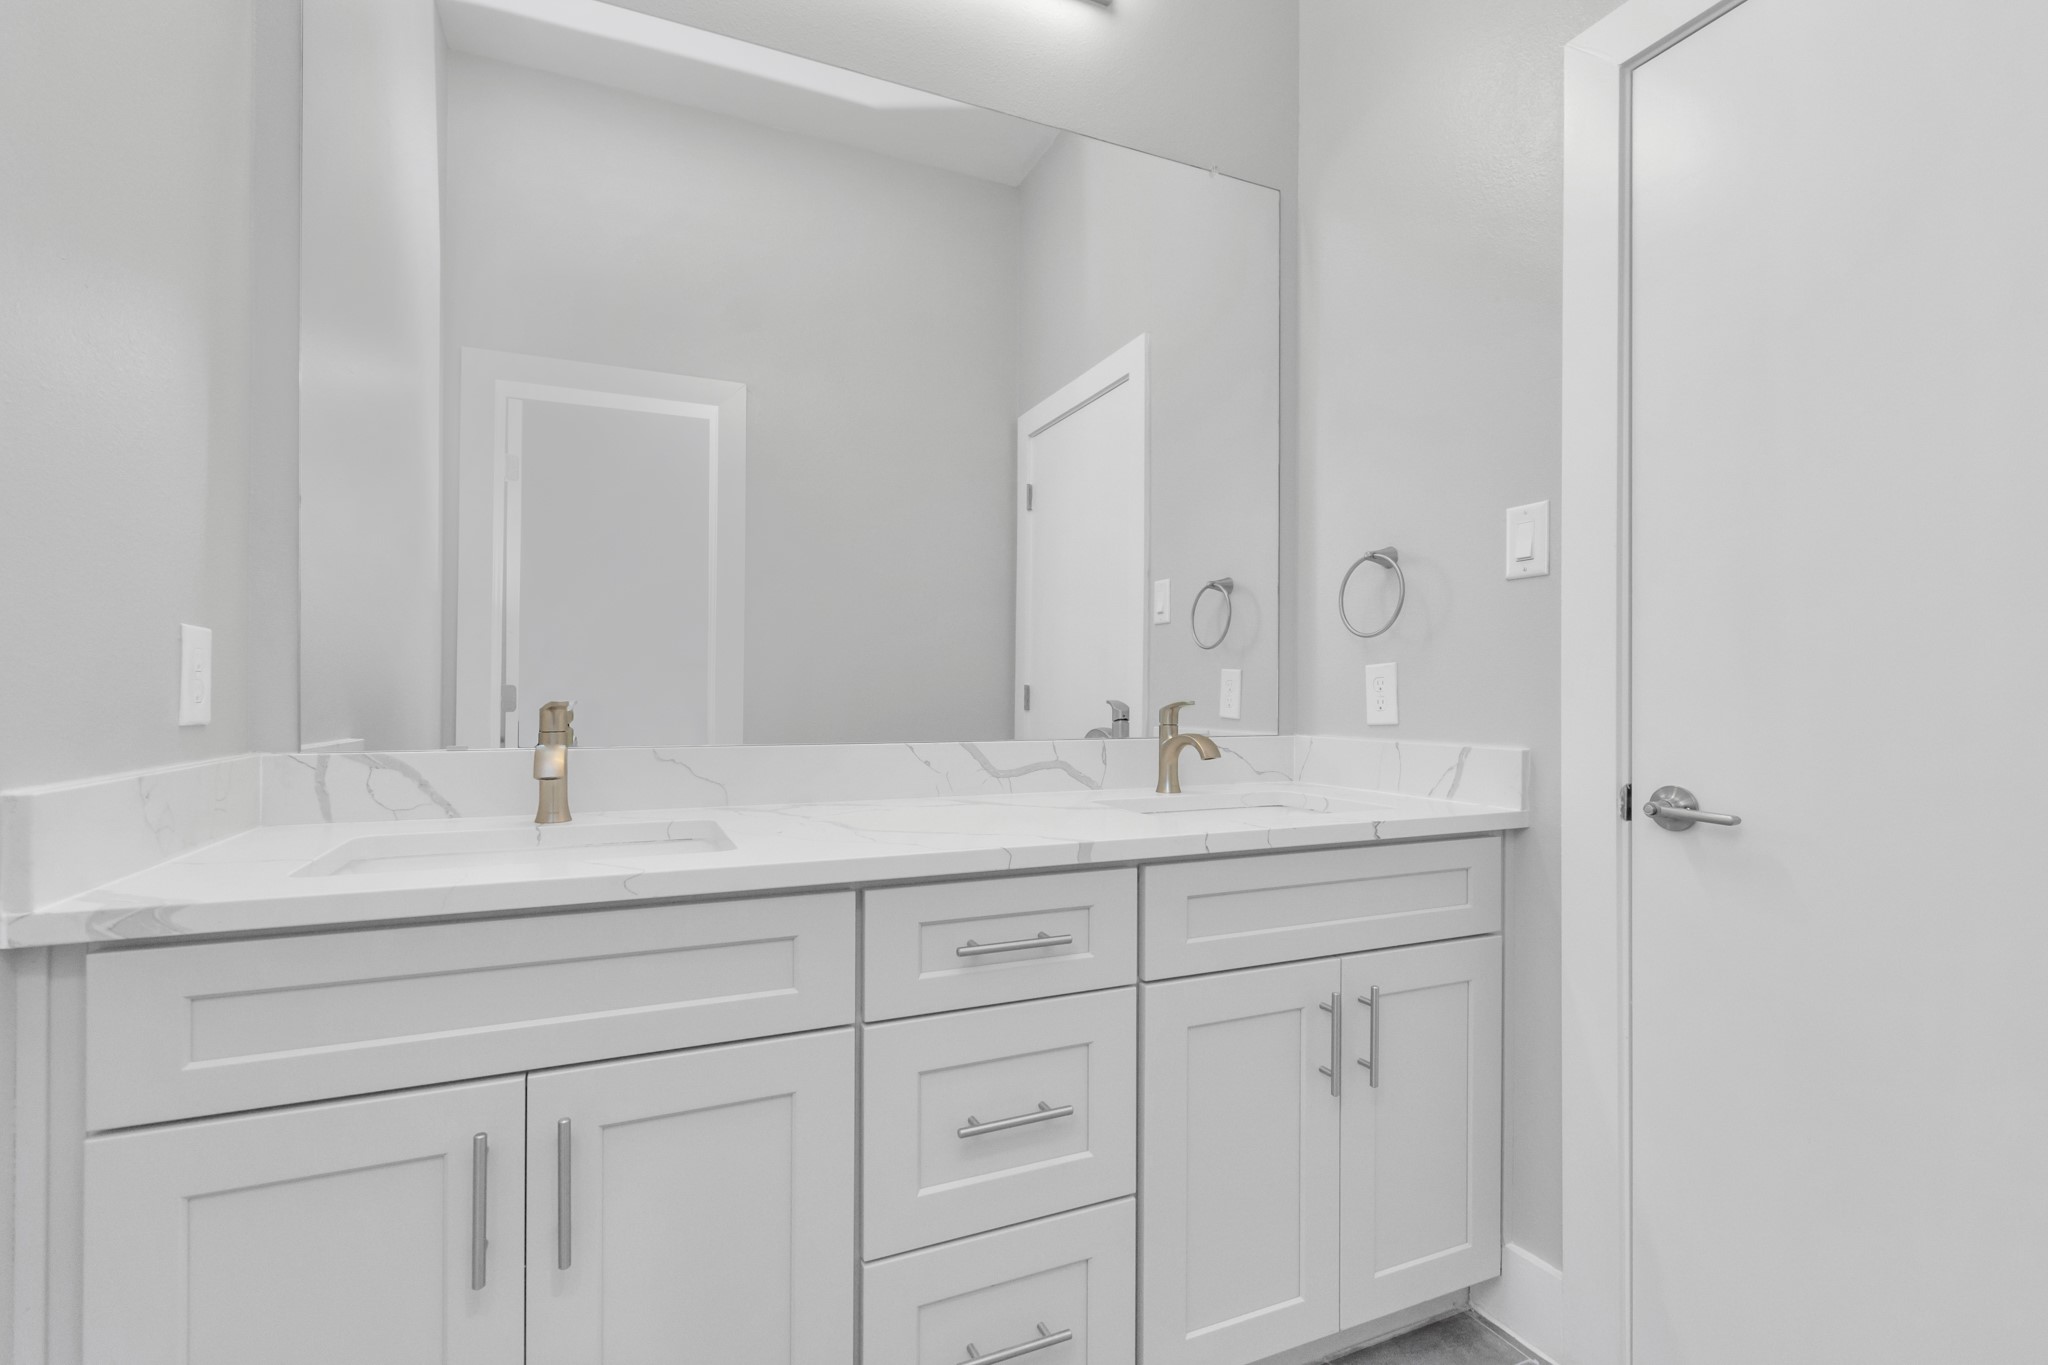 Secondary Bathroom for guests or family!